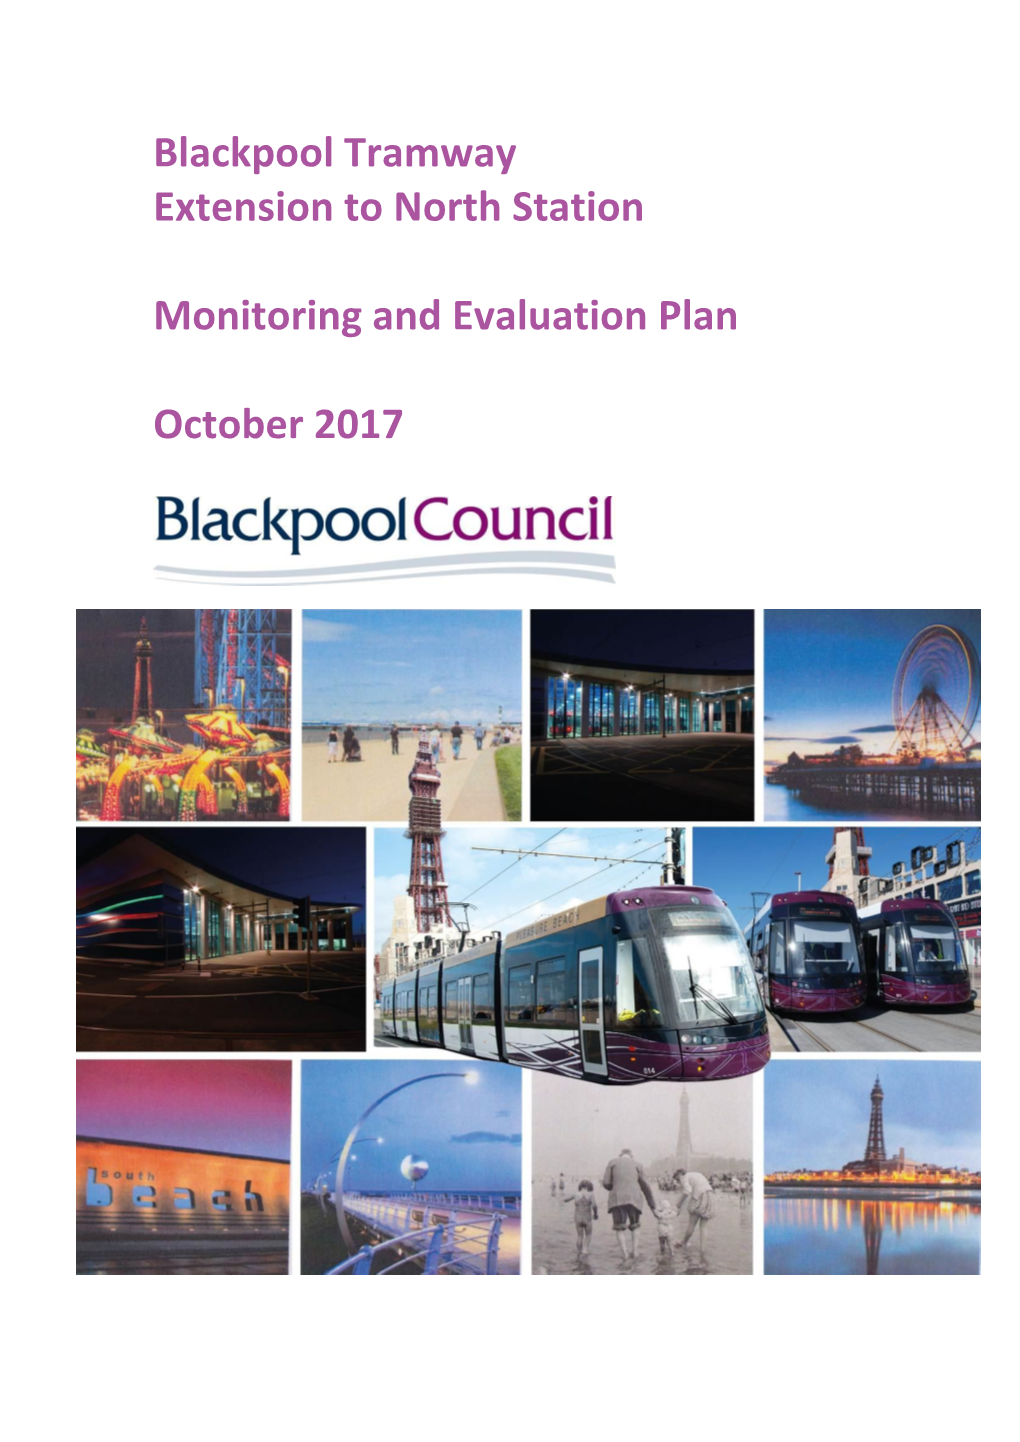 Blackpool Tramway Extension to North Station Monitoring And